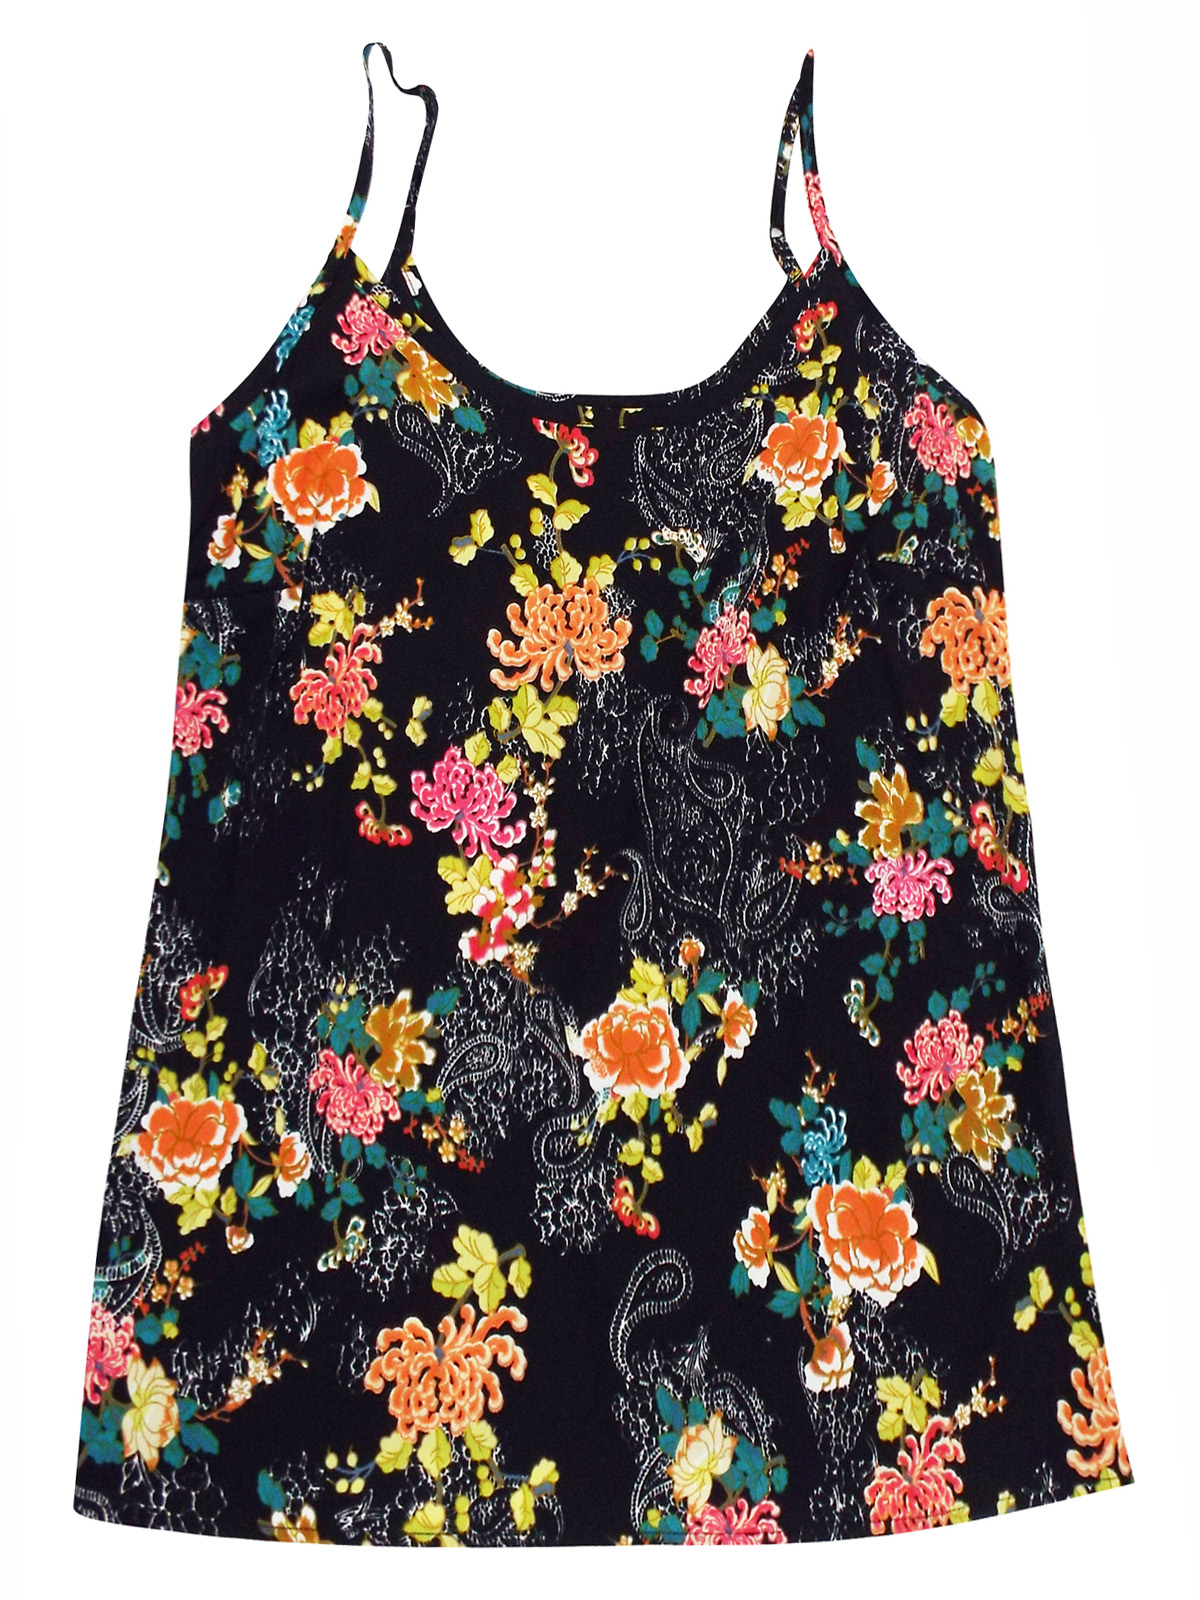 Plus Size wholesale clothing by simply be - - SimplyBe BLACK Floral ...